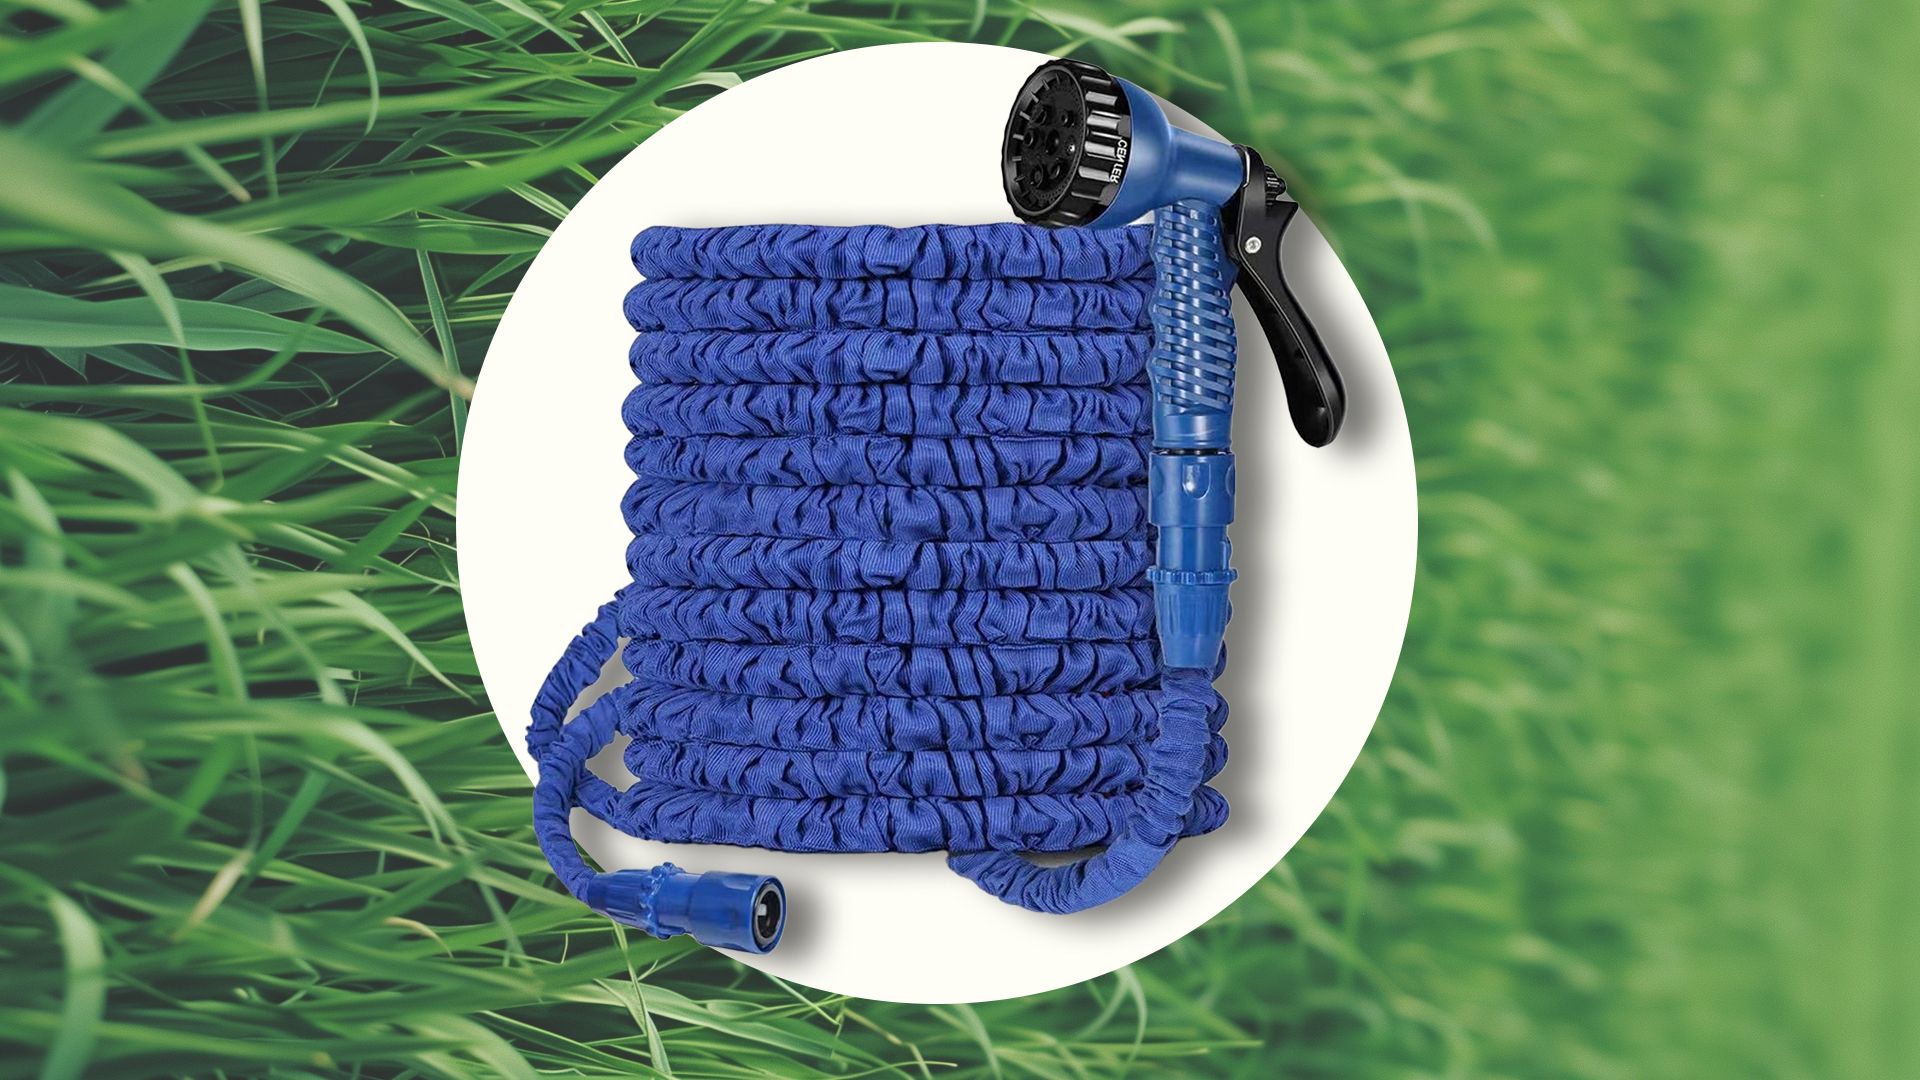 Shoppers 'highly recommend' this expandable garden hose - and it's 53% off